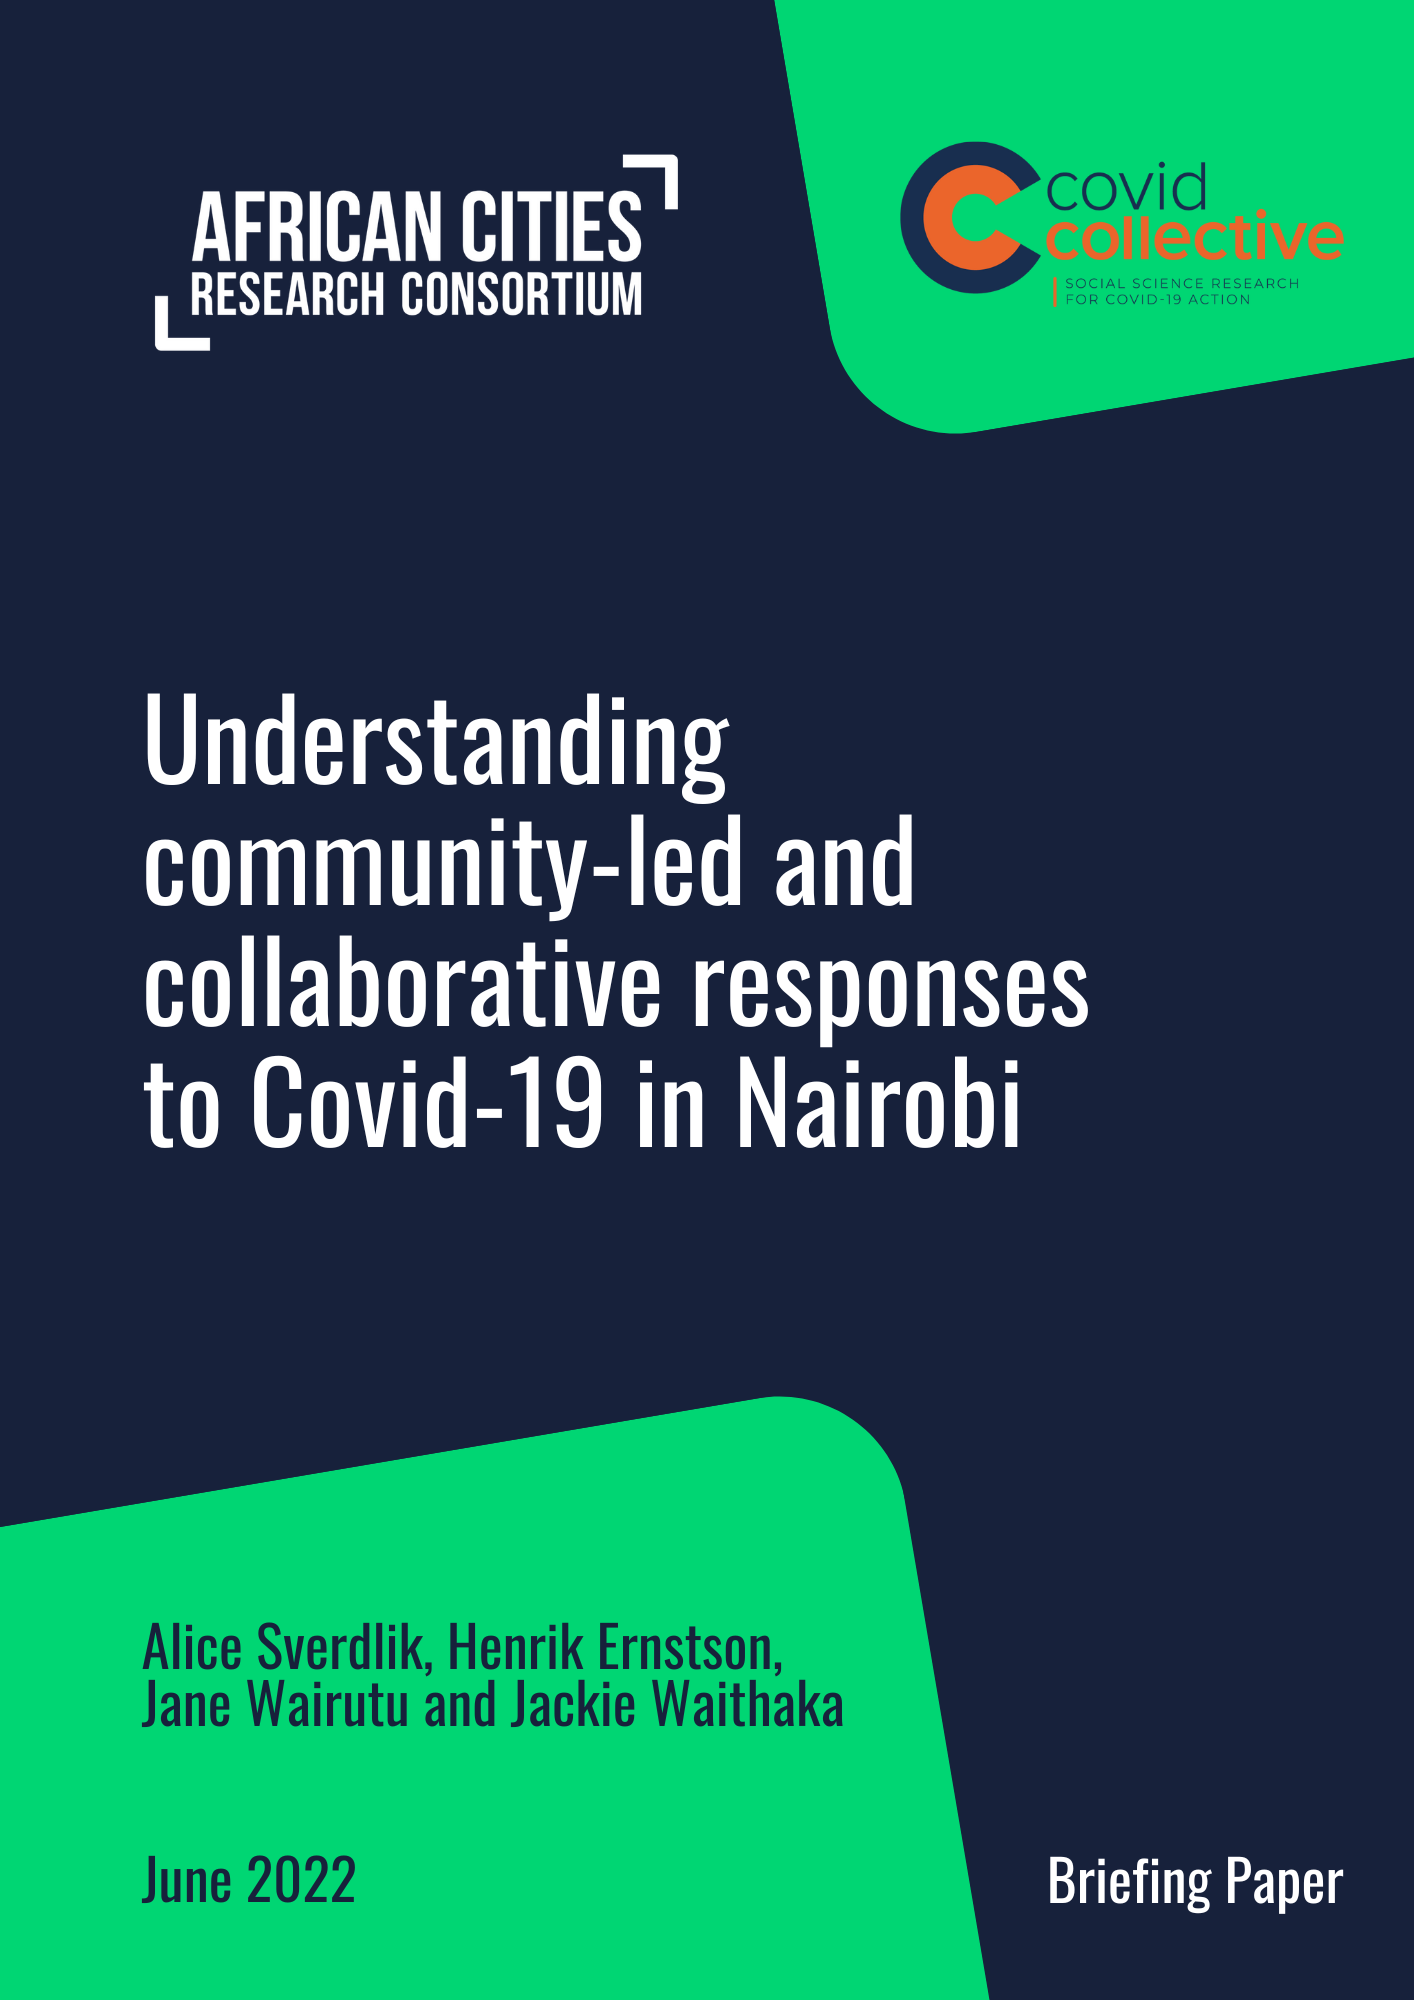 Understanding community-led and collaborative responses to Covid-19 in Nairobi